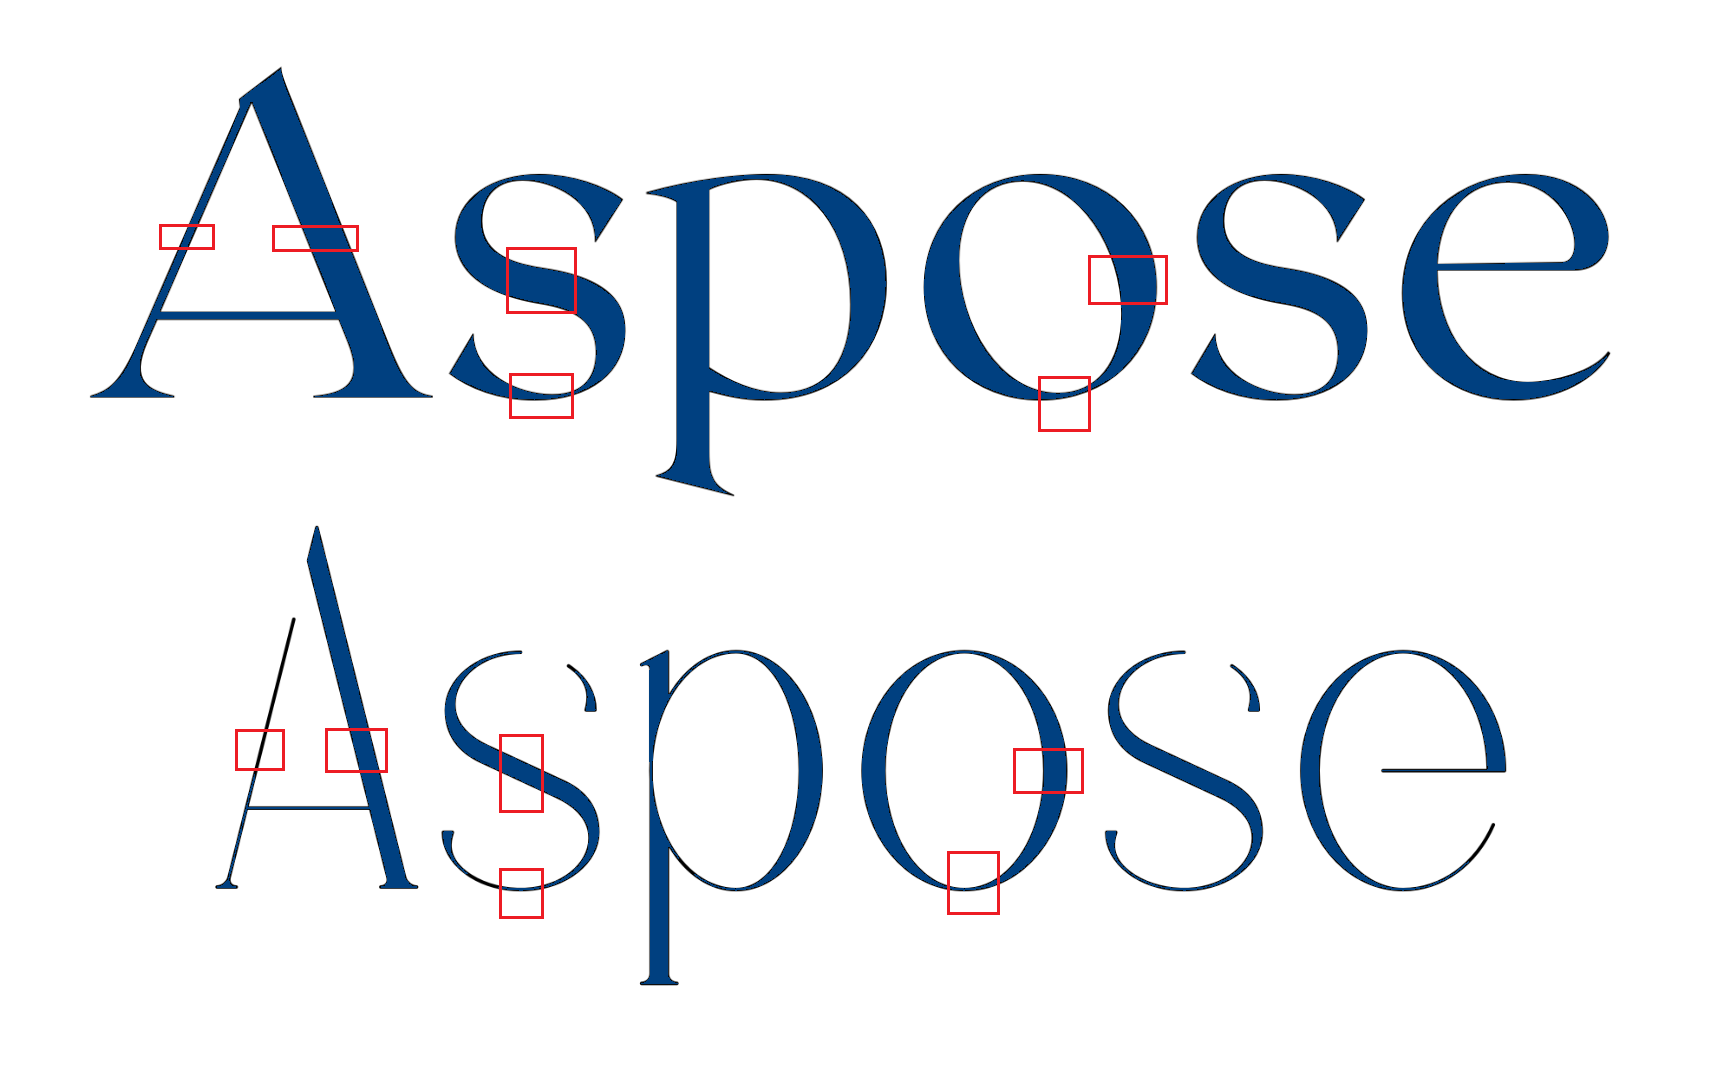 Contrast in letters of serif fonts